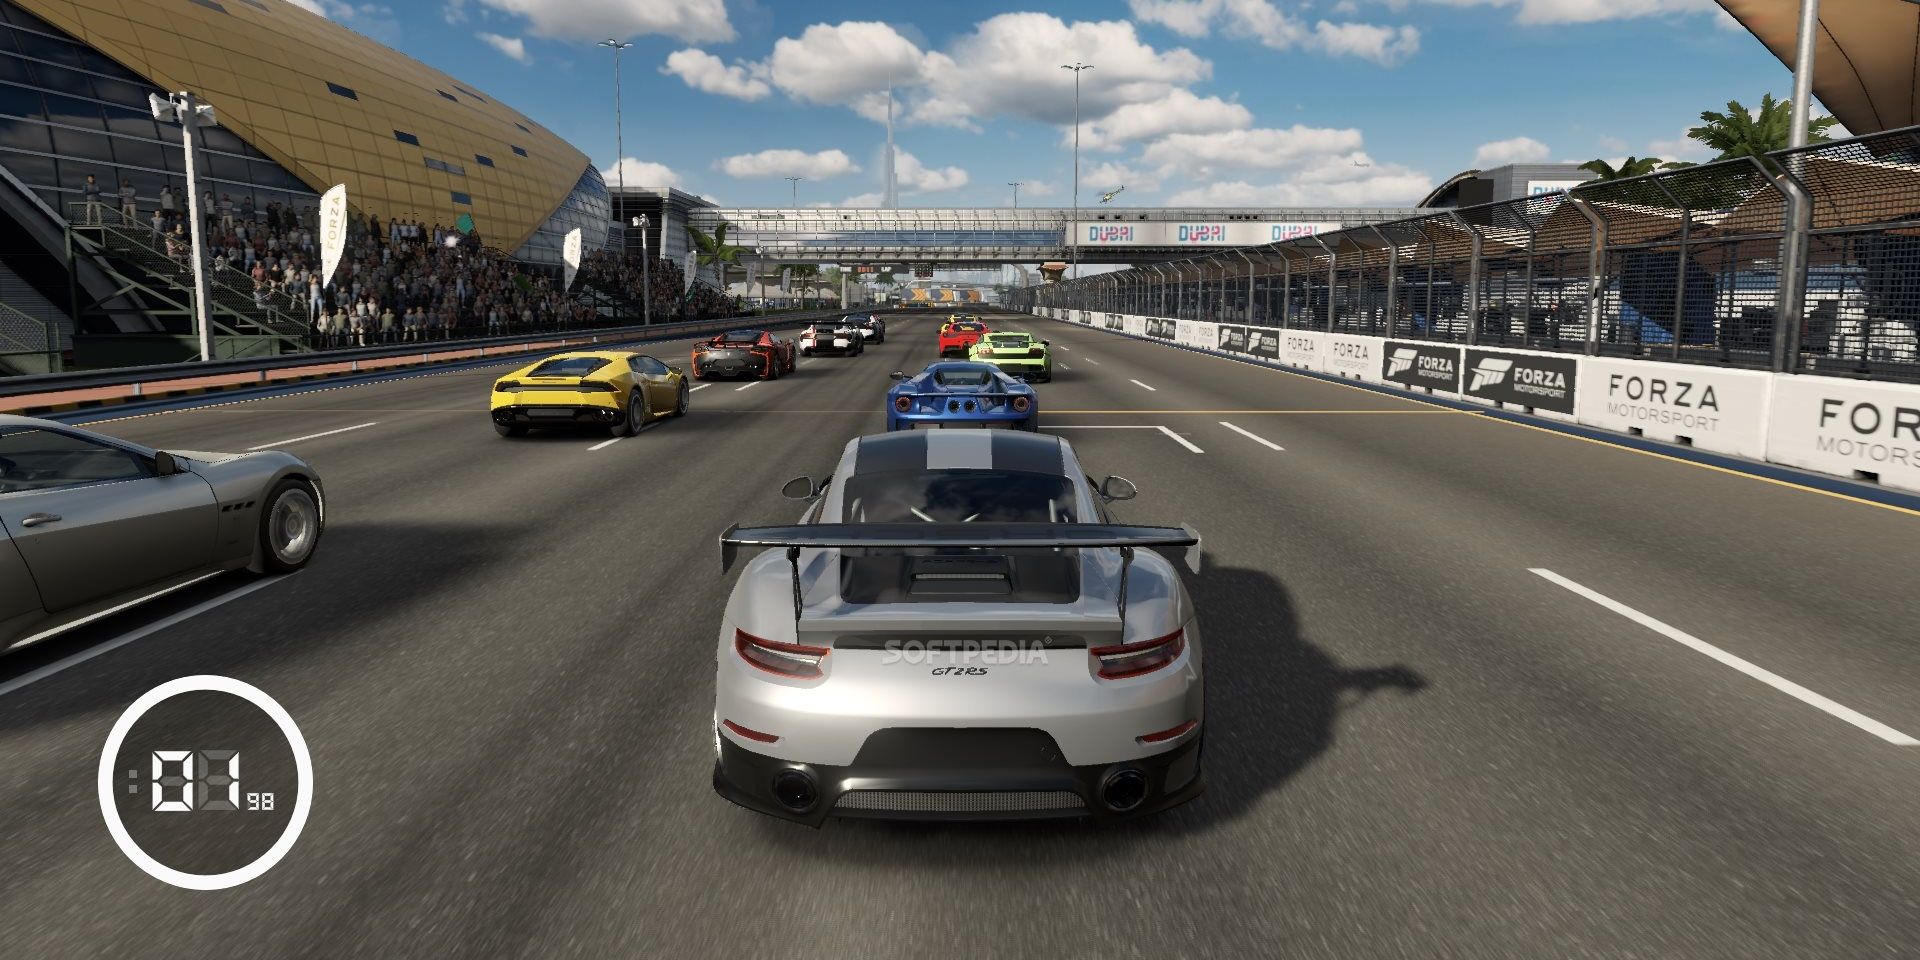 The beginning of a race in Forza Motorsport 7